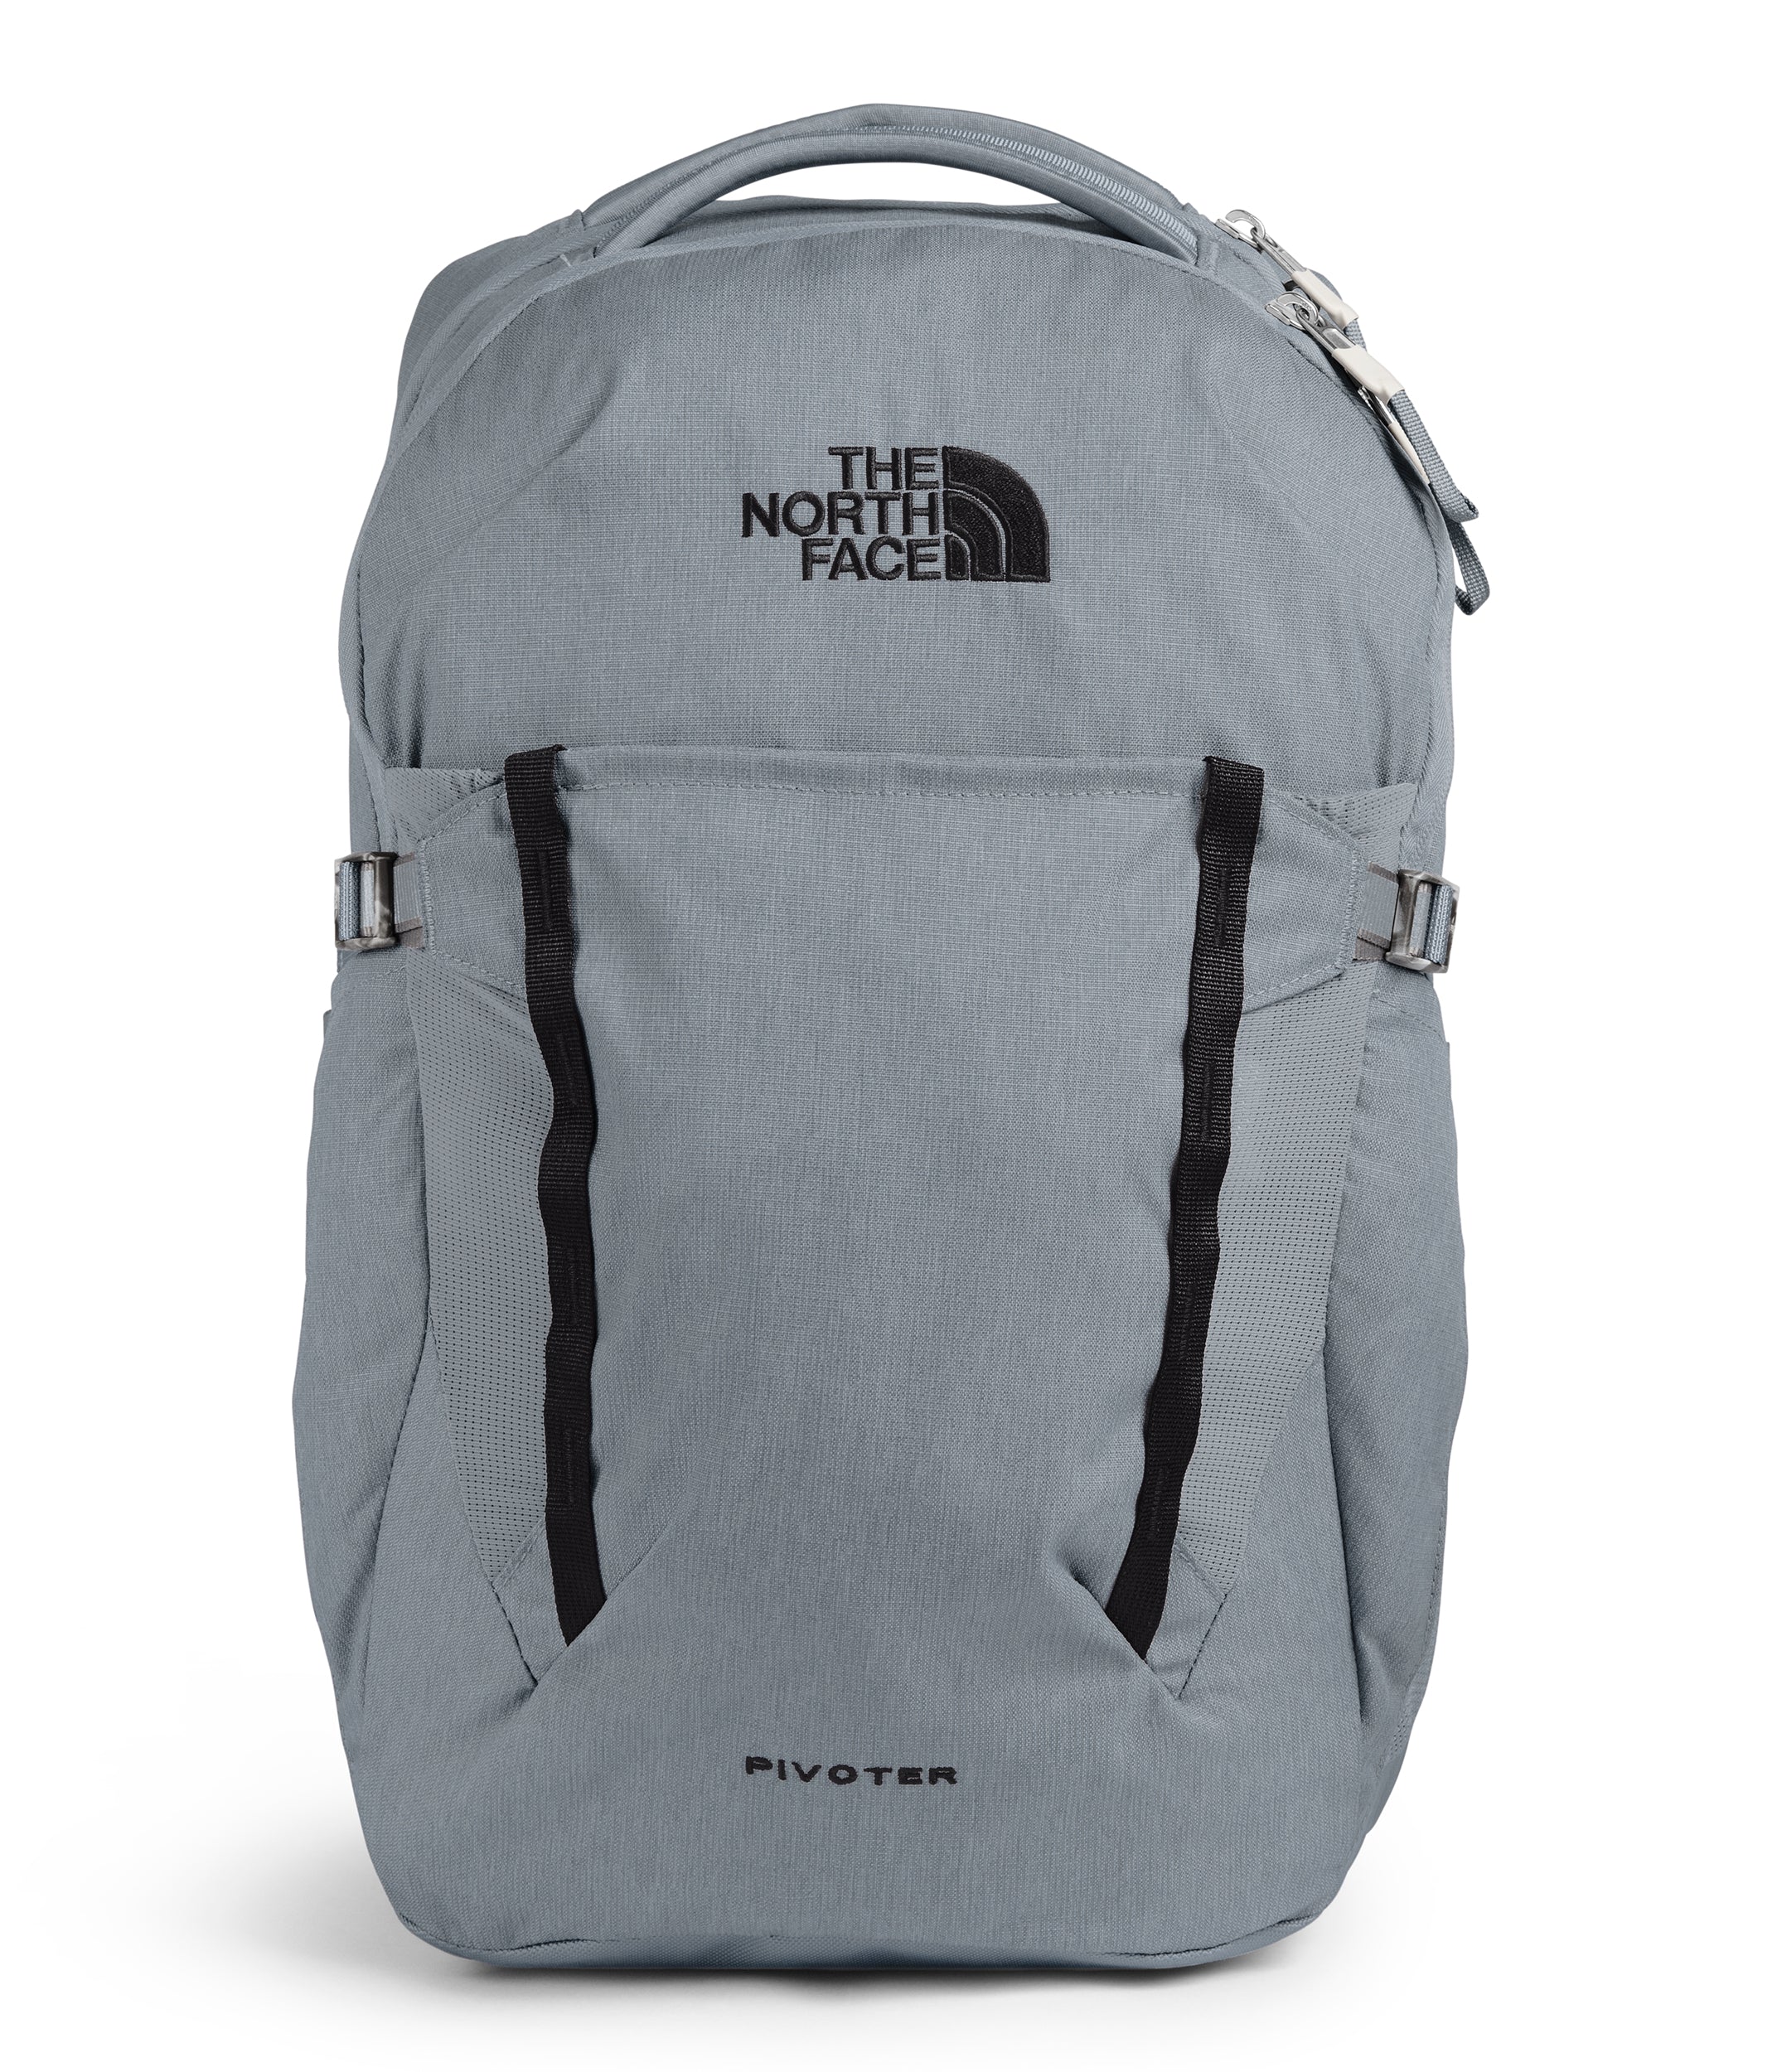 The North Face Pivoter Backpack - Mid Grey Dark Heather/TNF Black